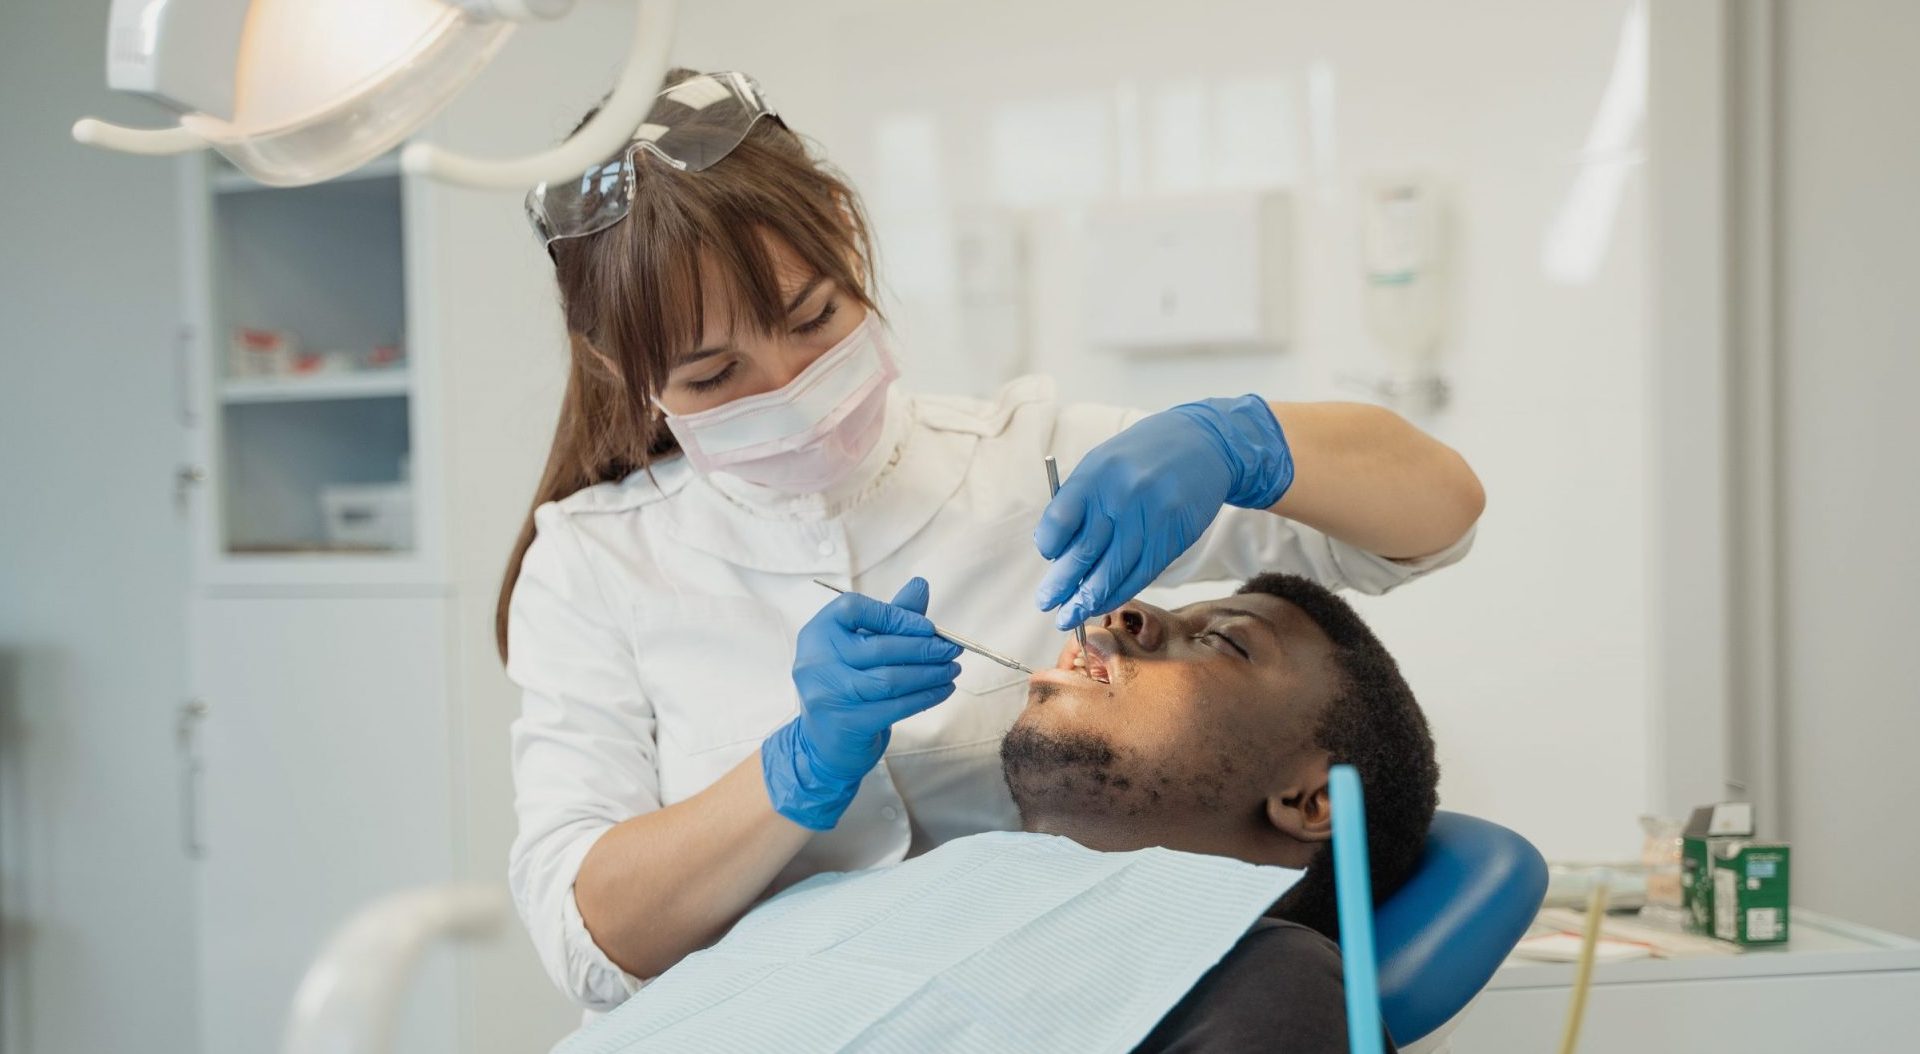 Here are 5 tips for recovering from dental surgery